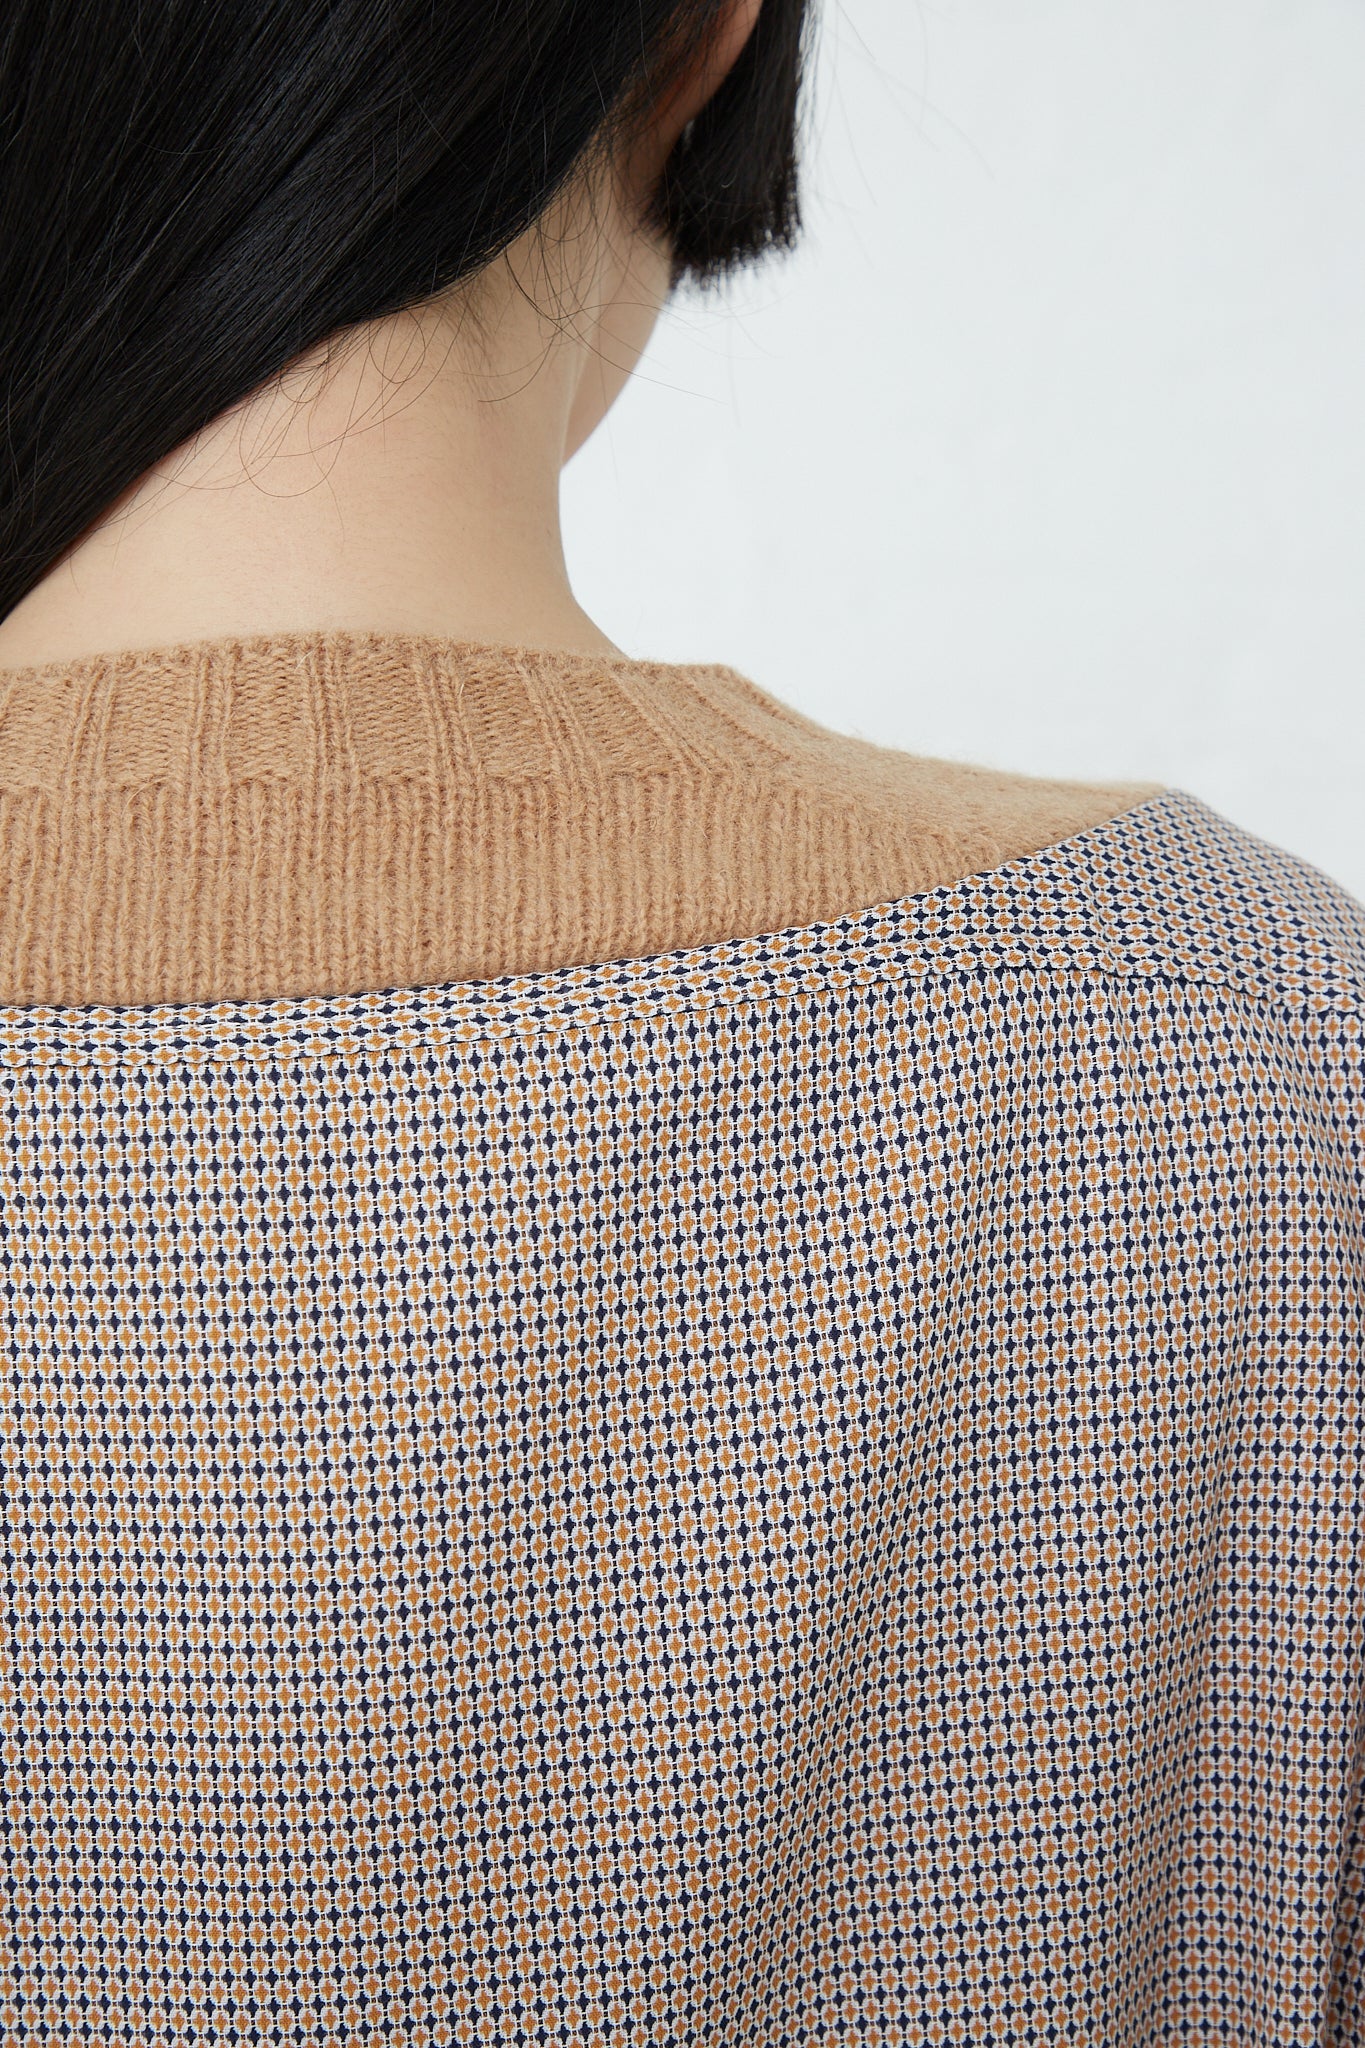 The back view of a woman wearing the Bless No. 68 Front Insert Pullover in Beige Pattern made from Shetland wool.